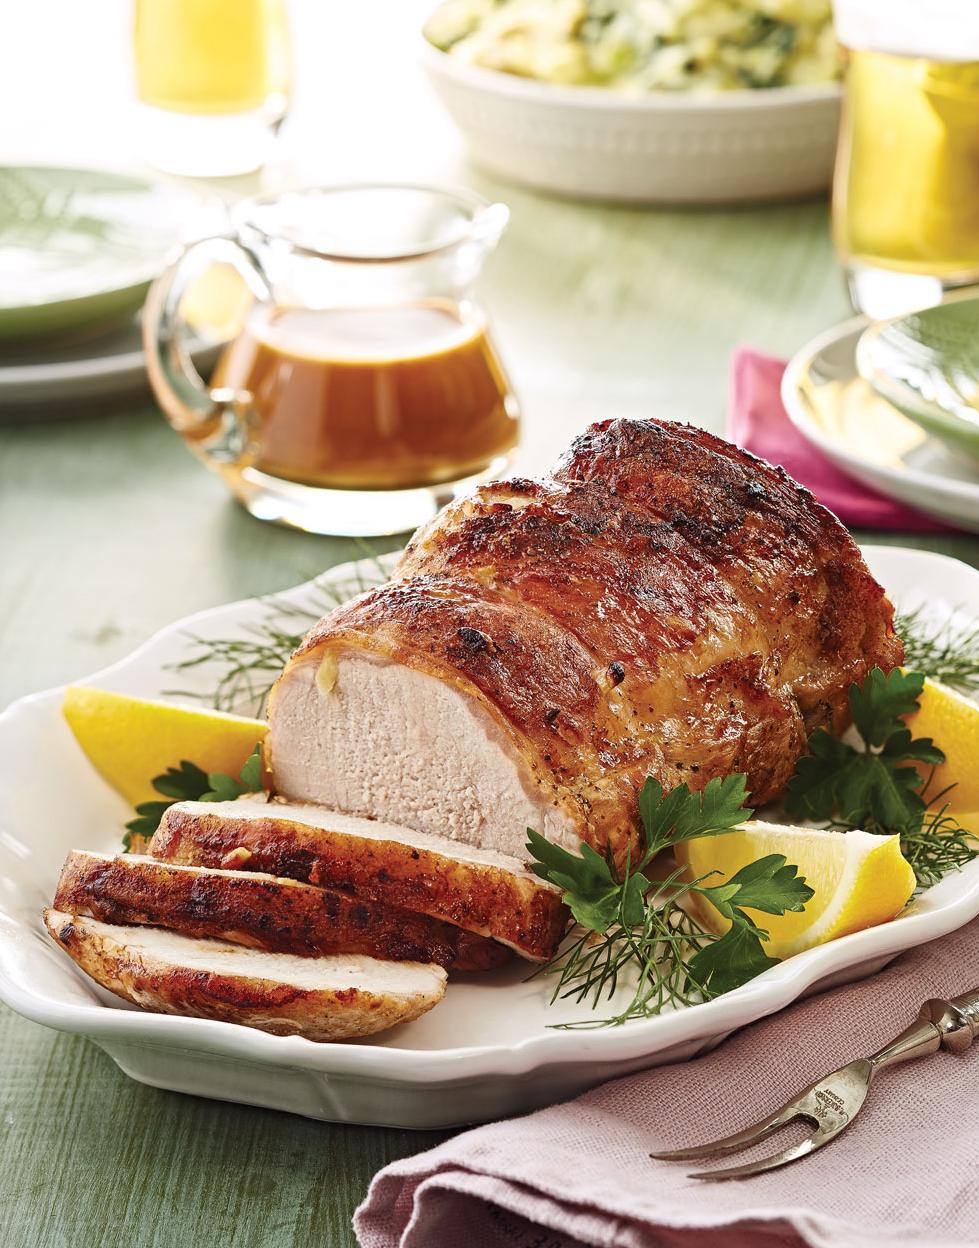  Pour some wine on it! A drool-worthy pork loin in a rich, boozy sauce that will satisfy your cravings.